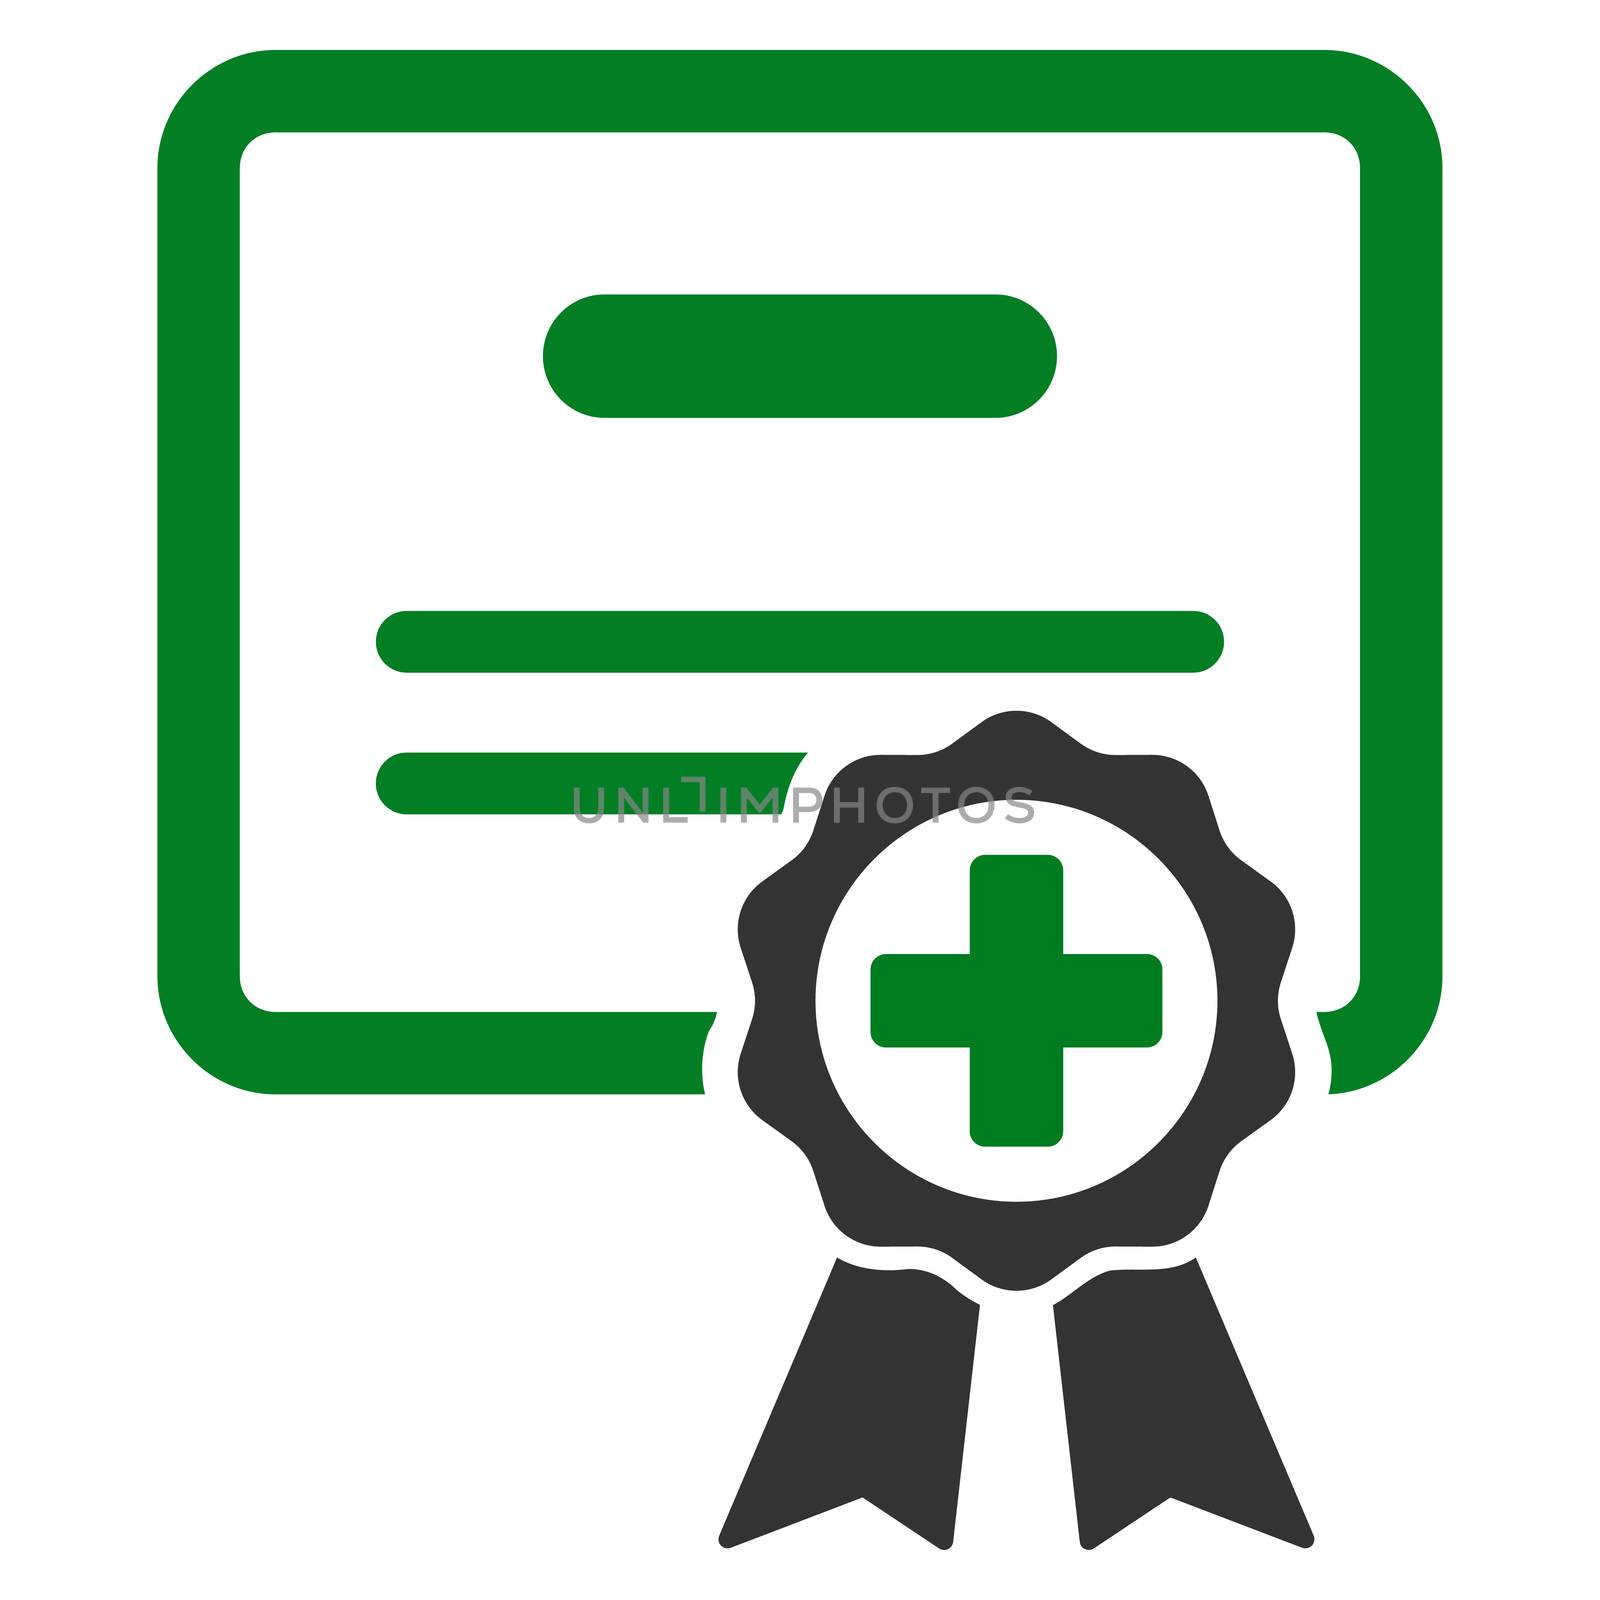 Certification raster icon. Style is bicolor flat symbol, green and gray colors, rounded angles, white background.